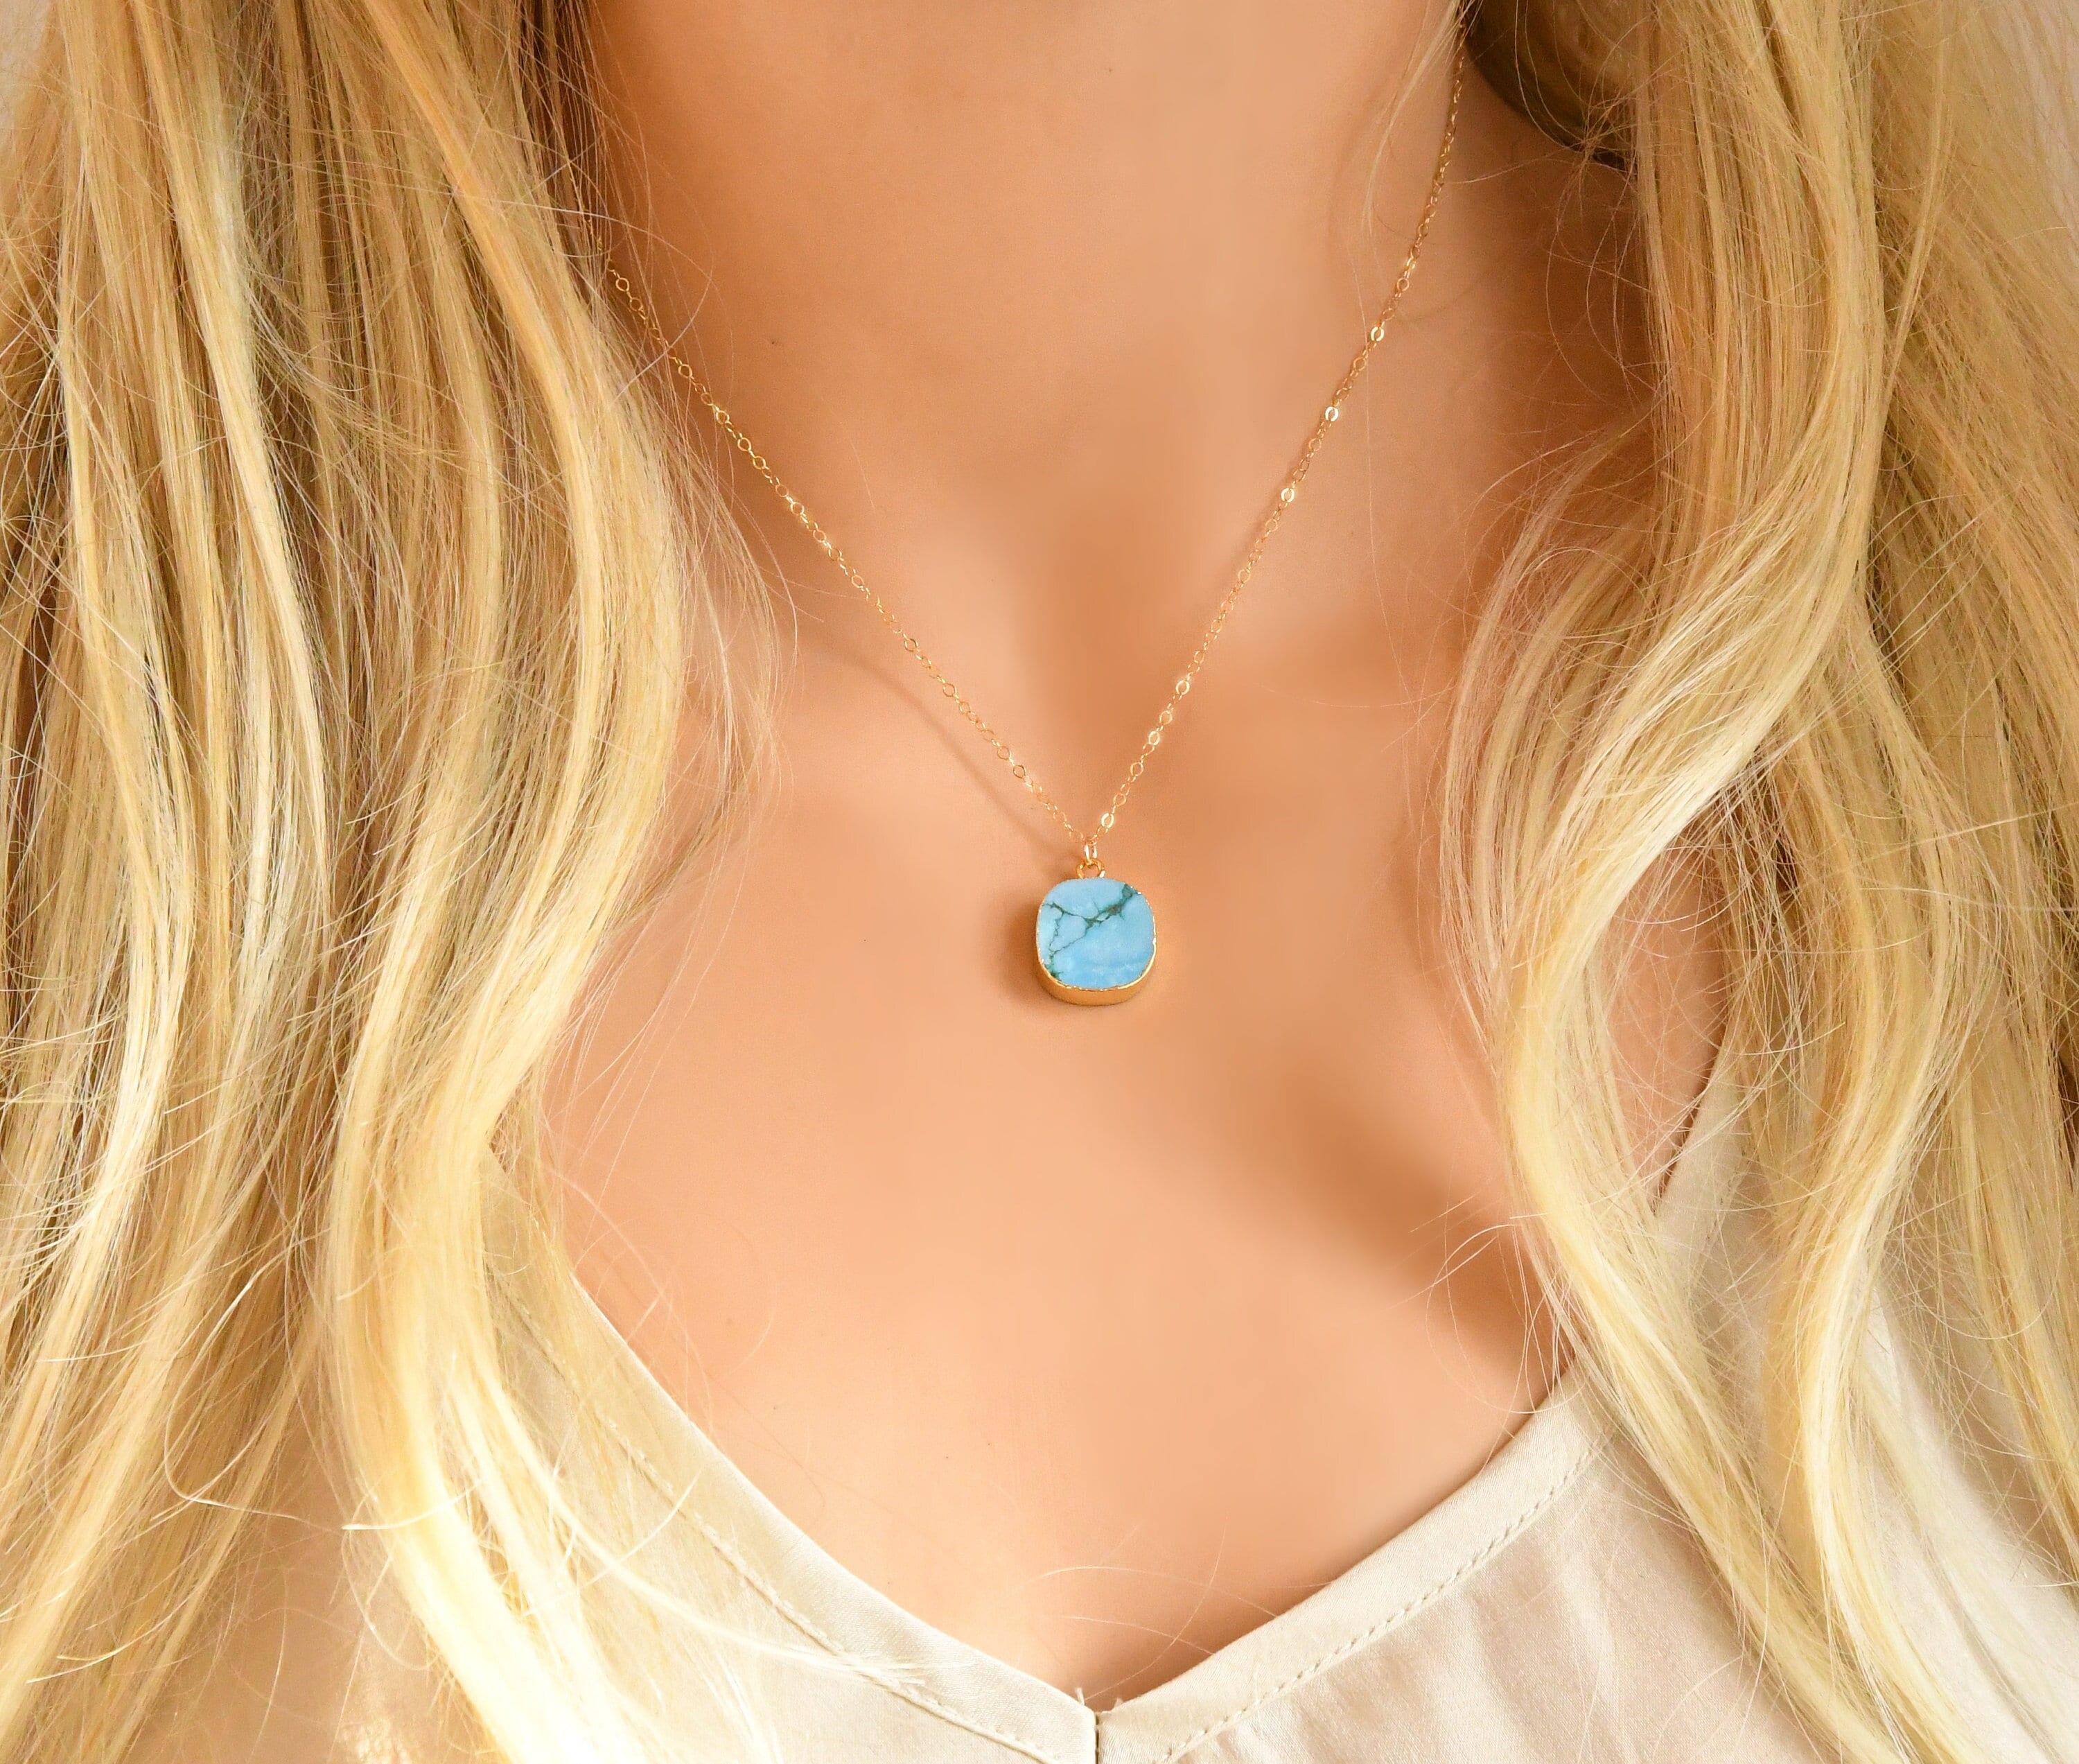 Buy Turquoise Necklace 14k Gold Filled Chain 24k Gold Online in